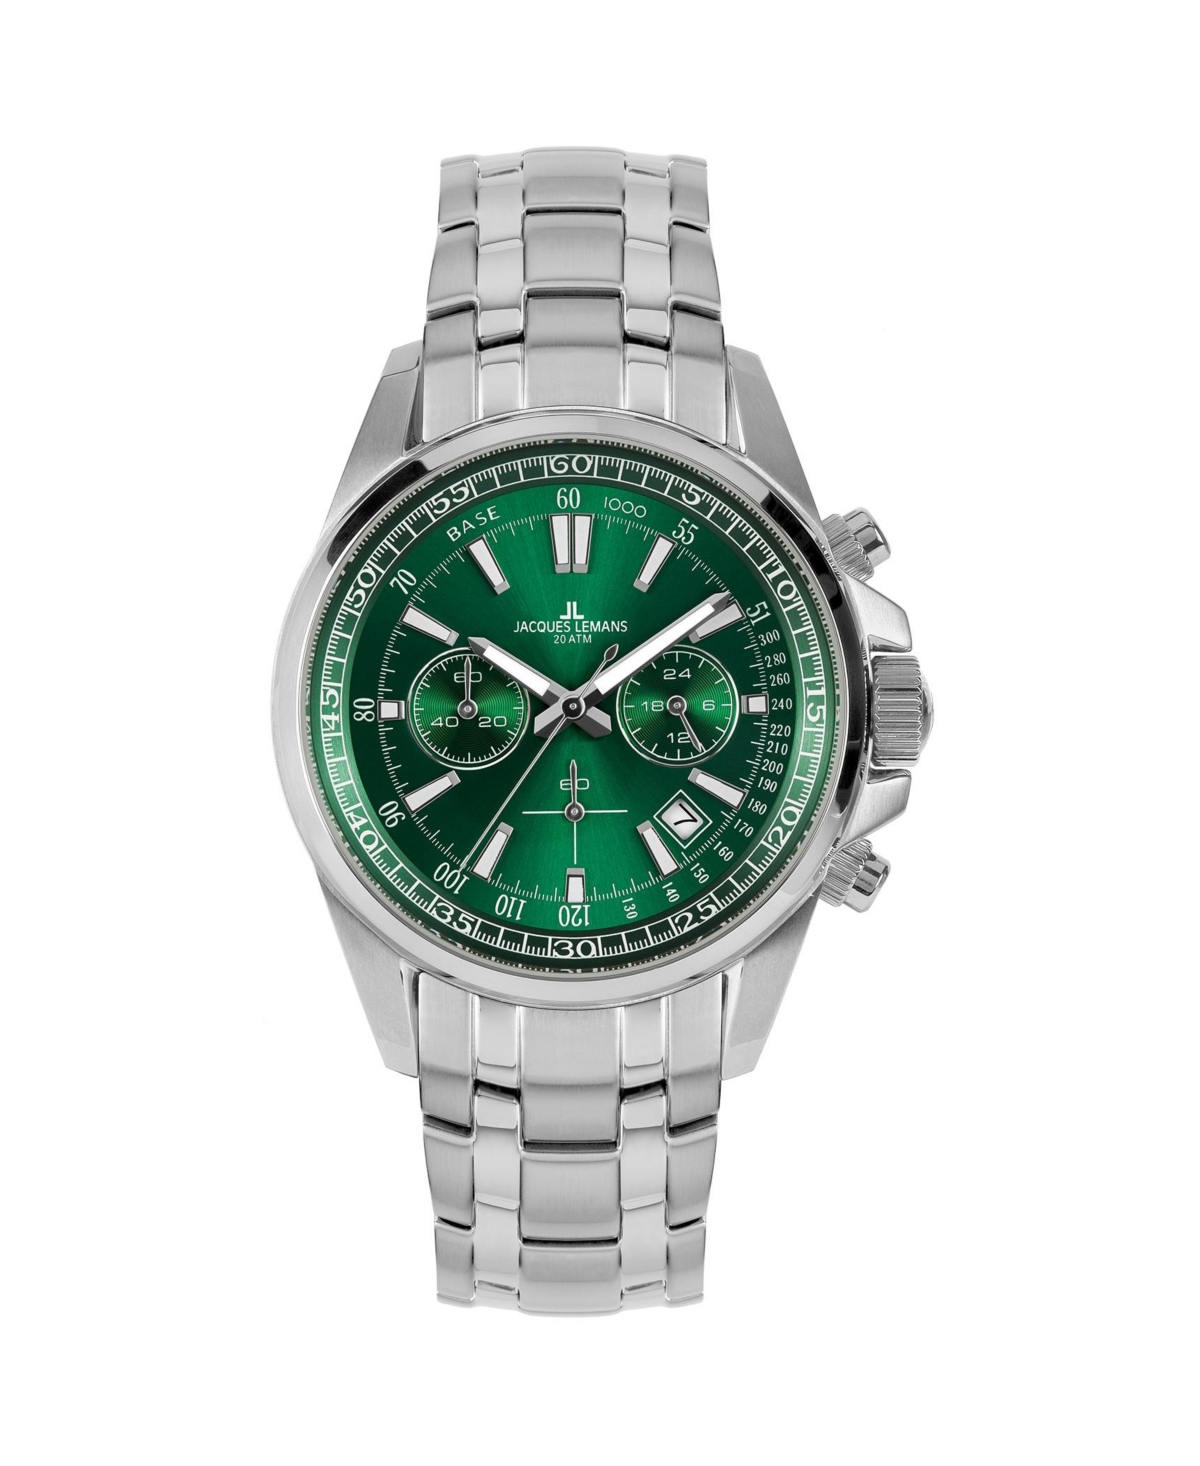 Jacques Lemans Men's Liverpool Watch with Solid Stainless Steel Strap, Chronograph  1-2117 - Medium green | Smart Closet